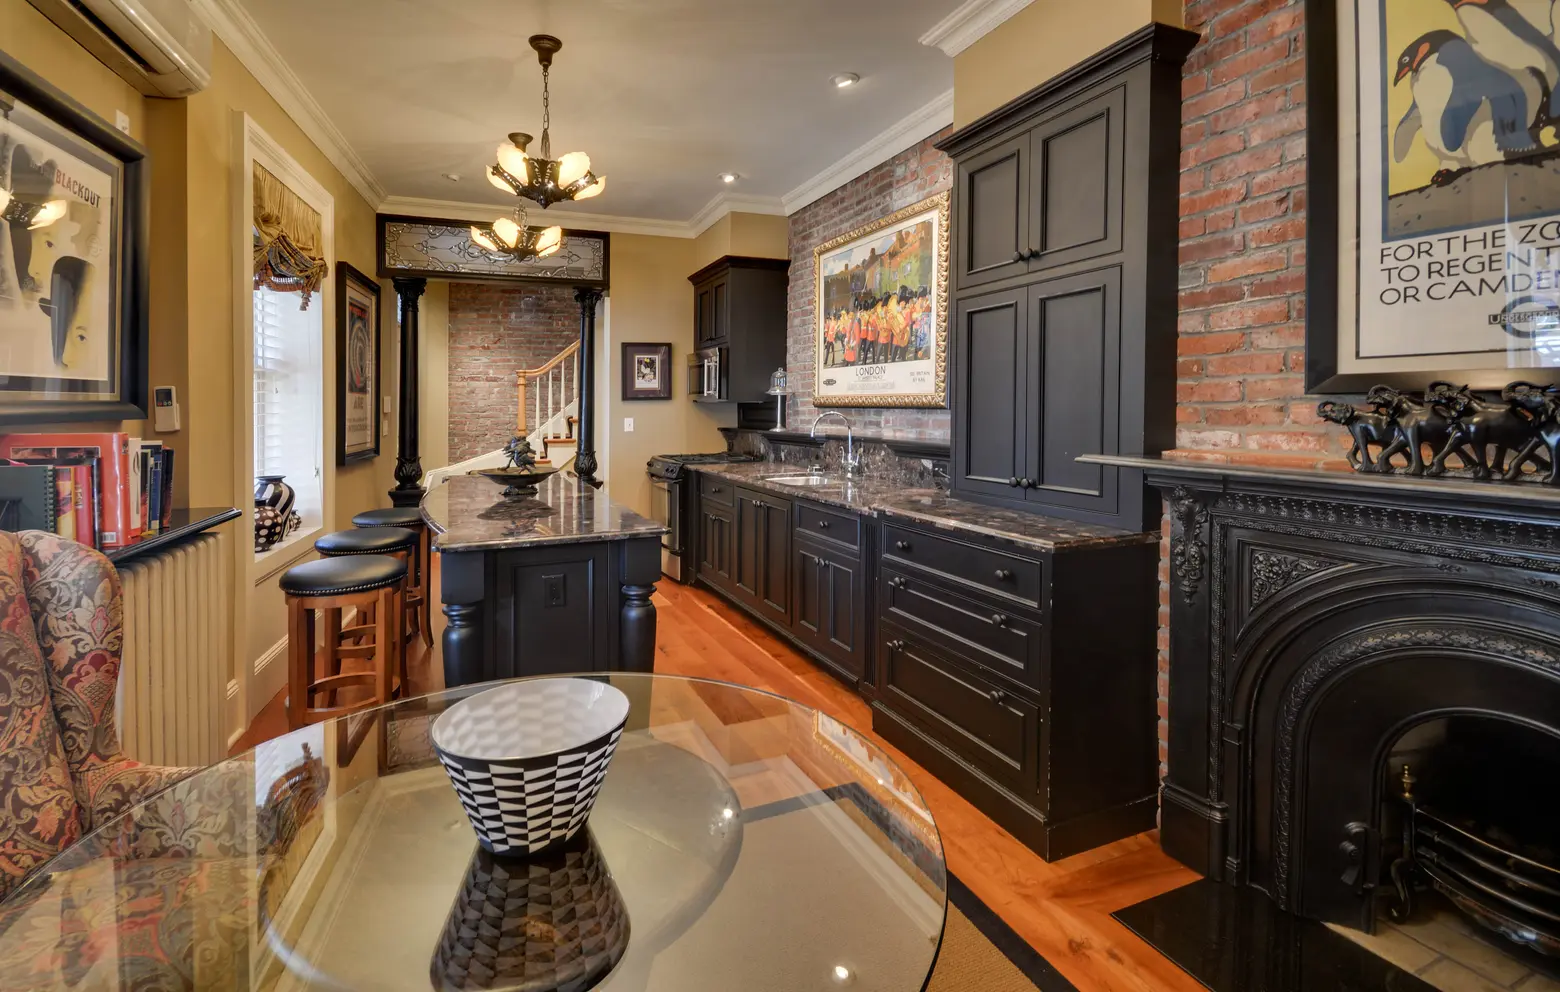 1846 Townhouse Featured on the Brooklyn Heights House Tour Asks $4.95 Million